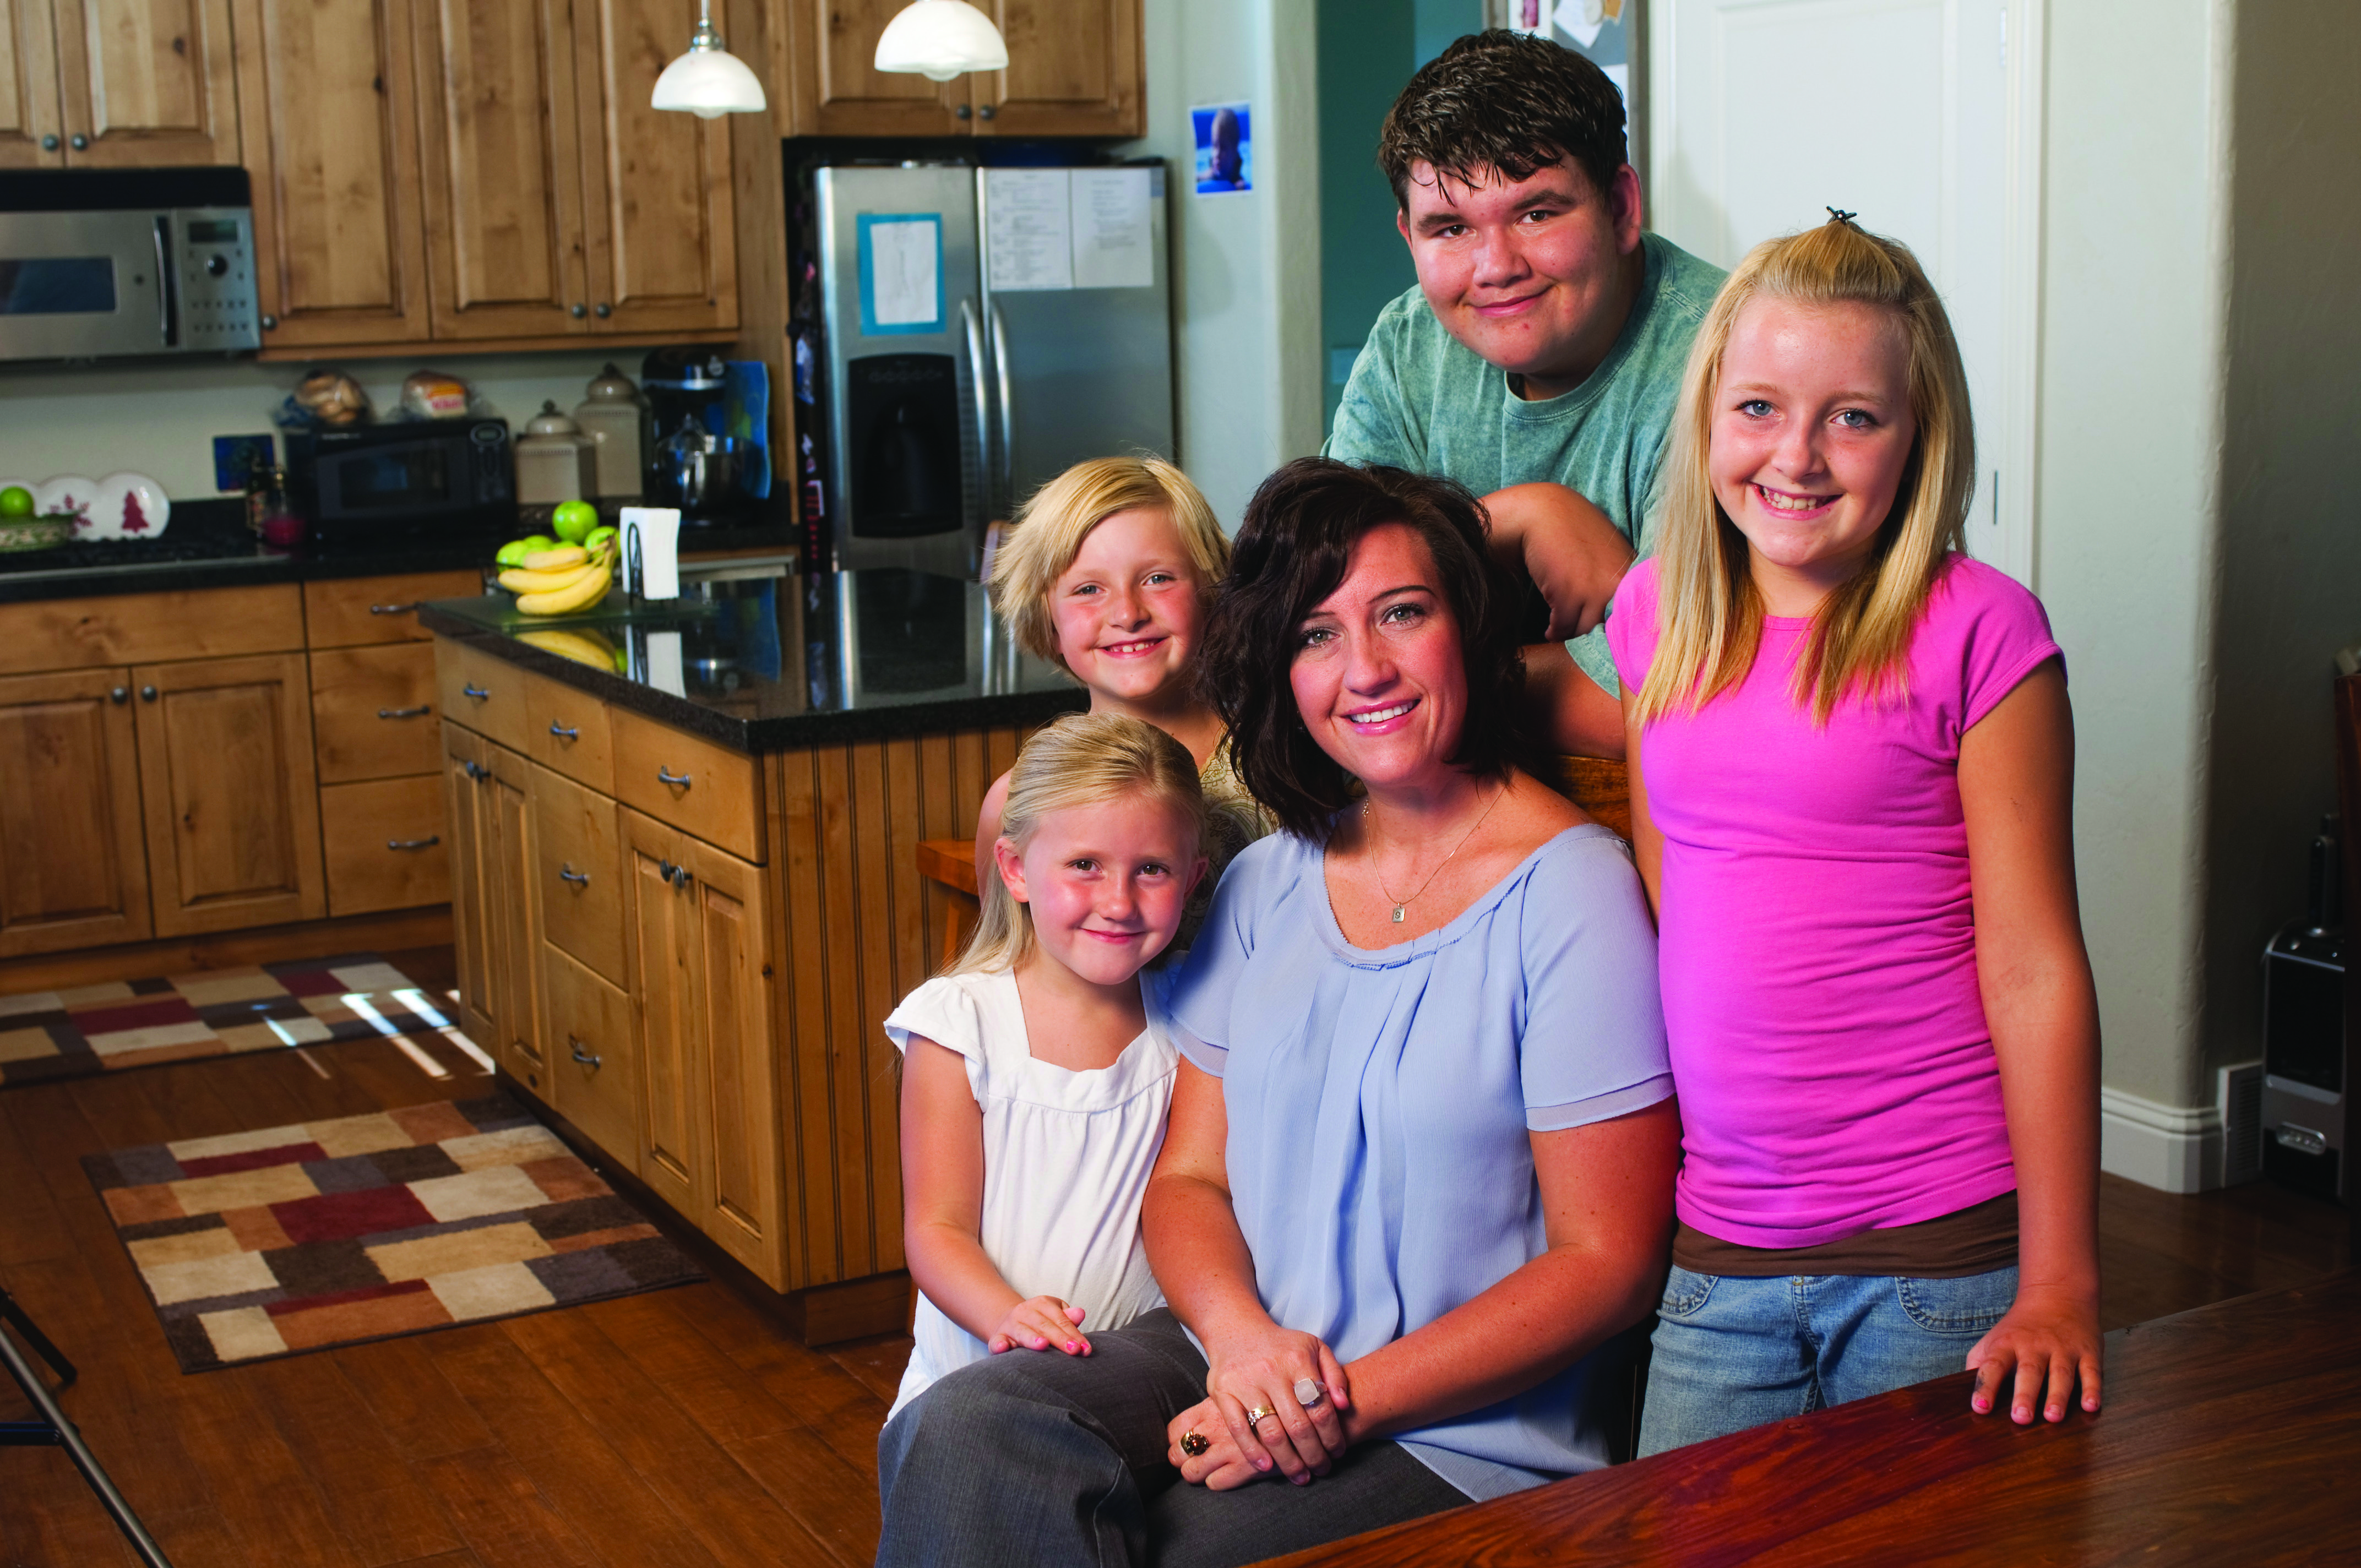 Driven by her love for her children, Lisa refused to give up in spite of her dire situation